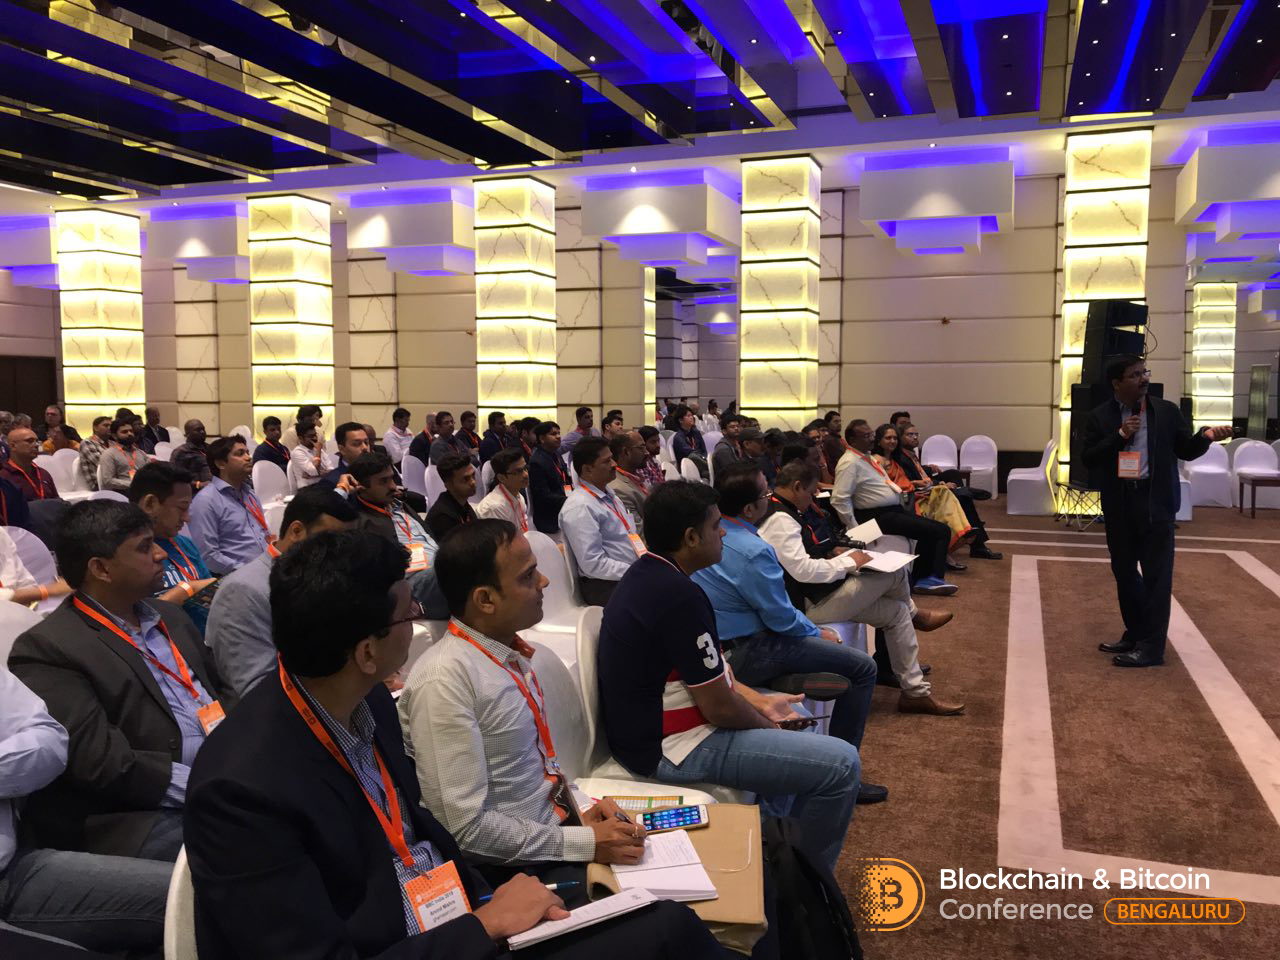 Blockchain & Bitcoin Conference Bengaluru discussed new laws in India that might touch ICO and blockchain - 3